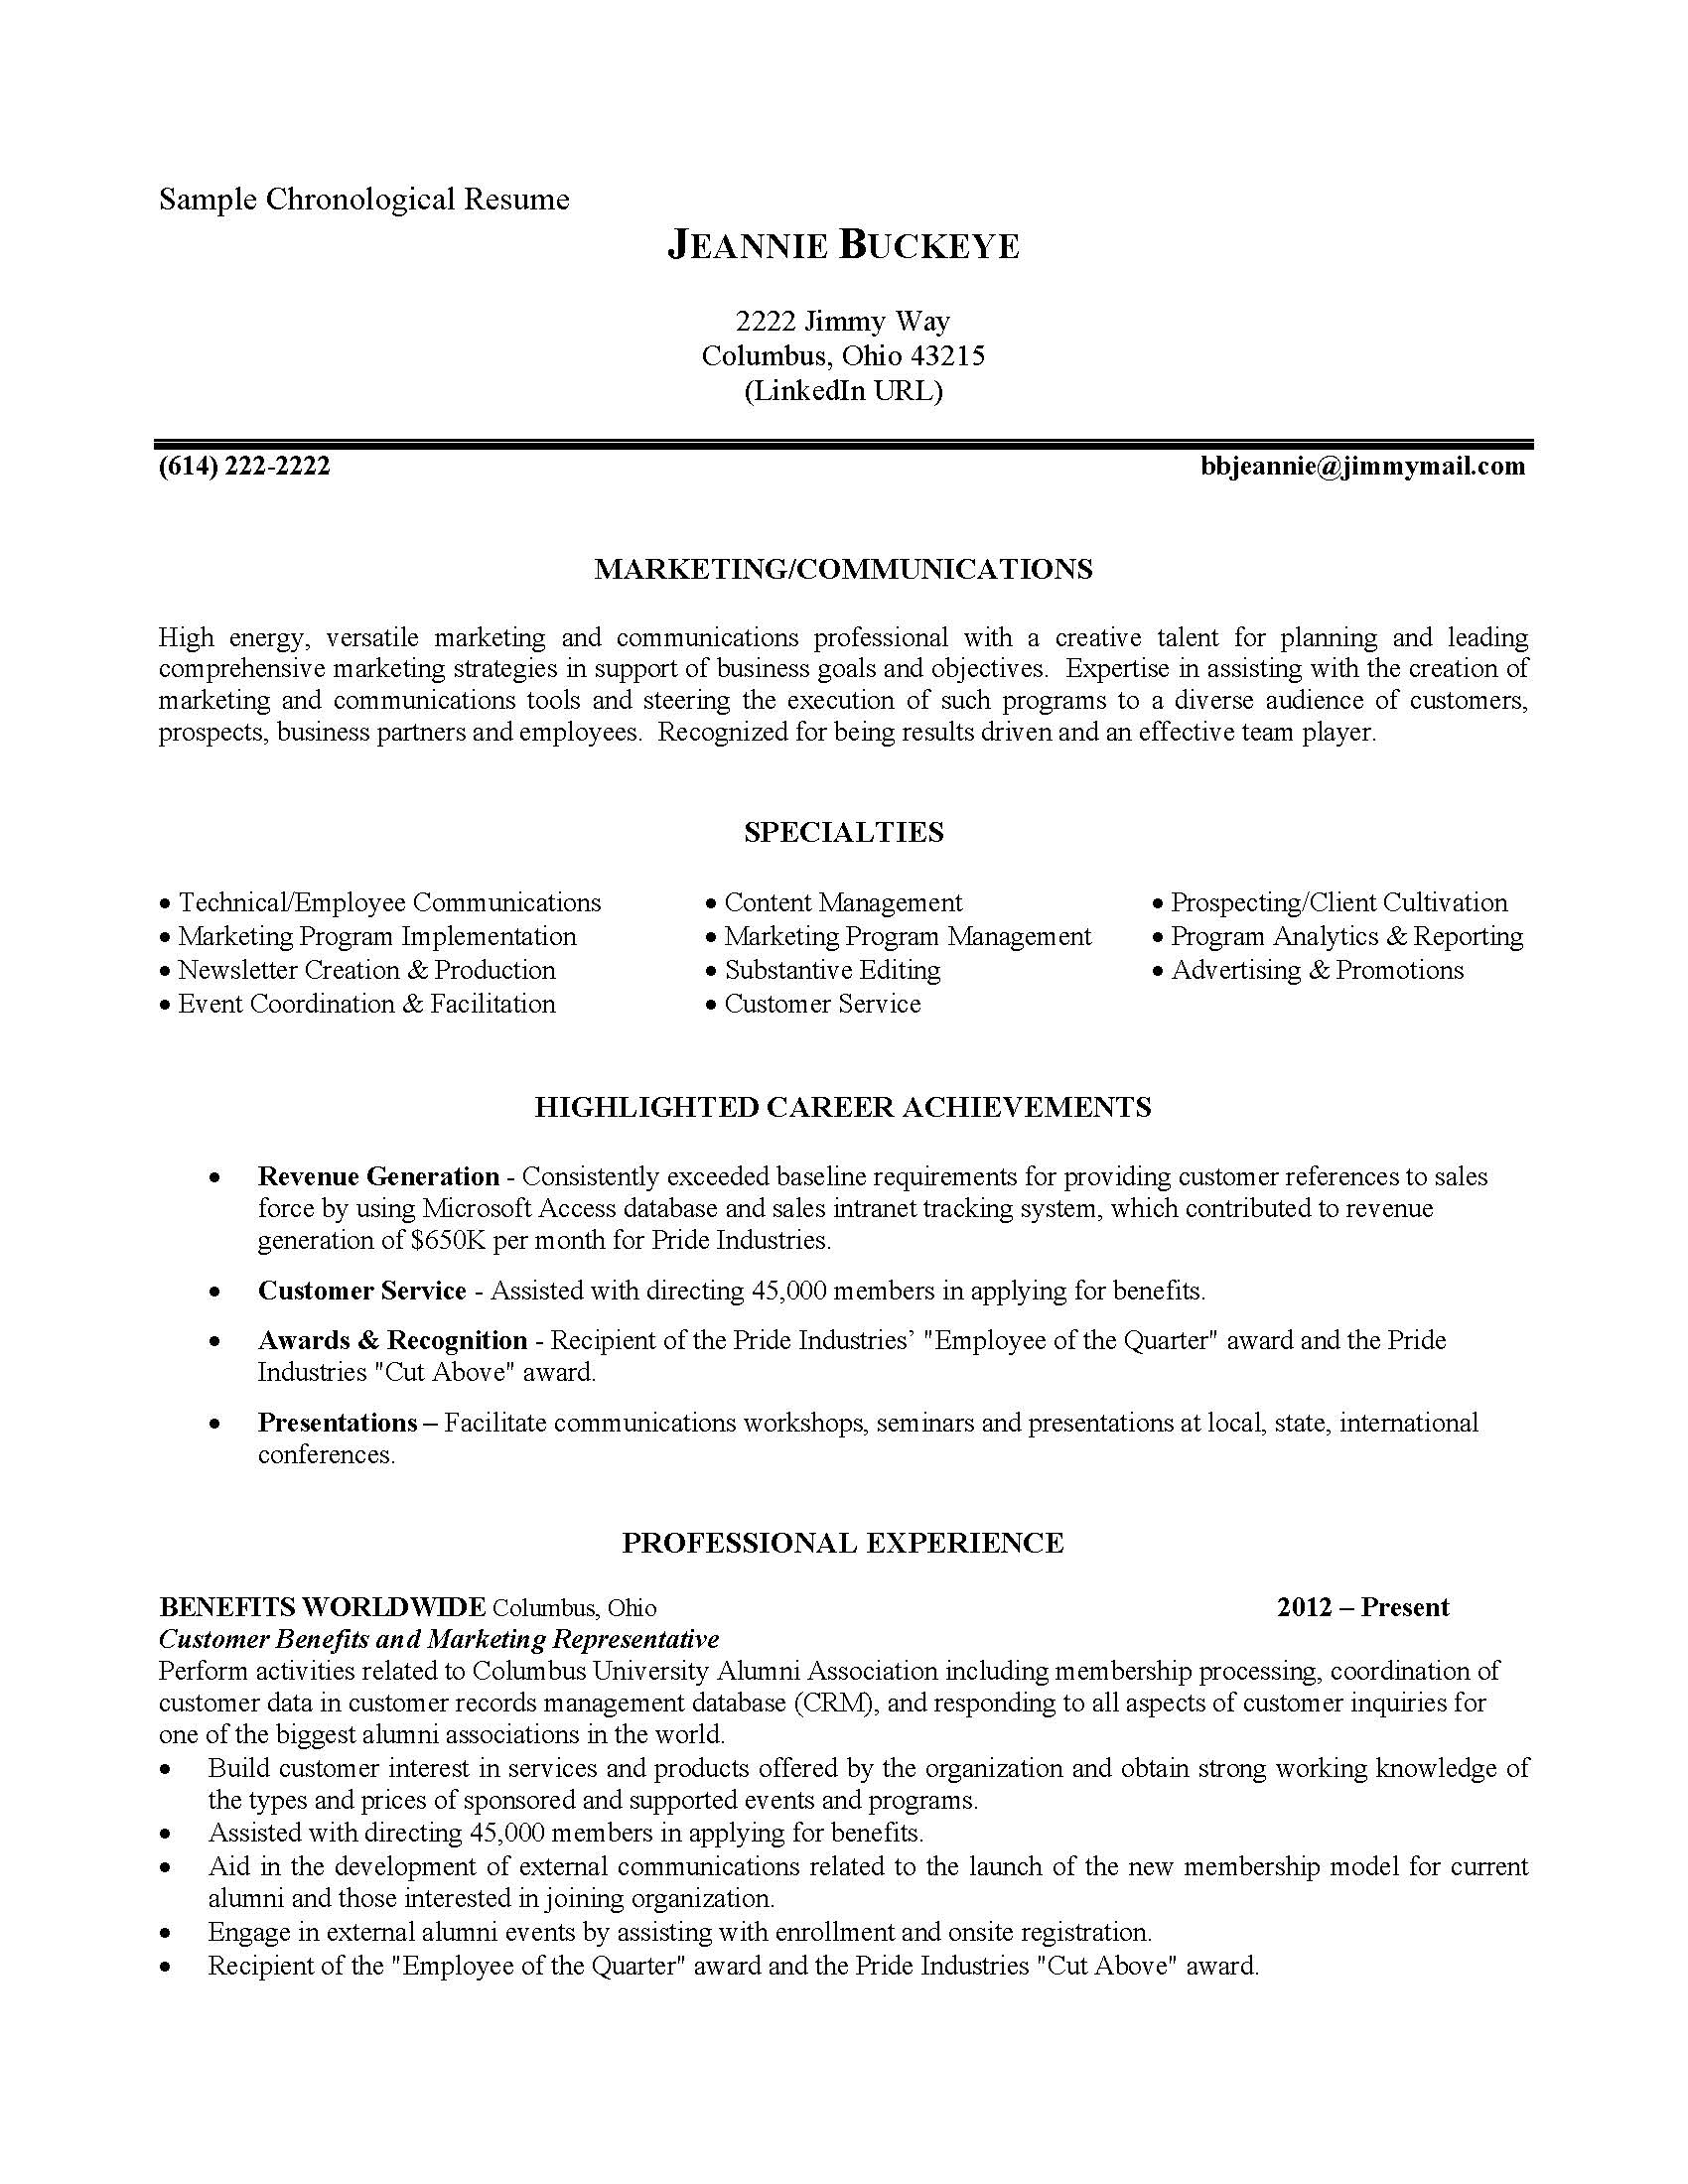 Resumes And Cover Letters Ohio State Alumni Association pertaining to dimensions 1700 X 2200